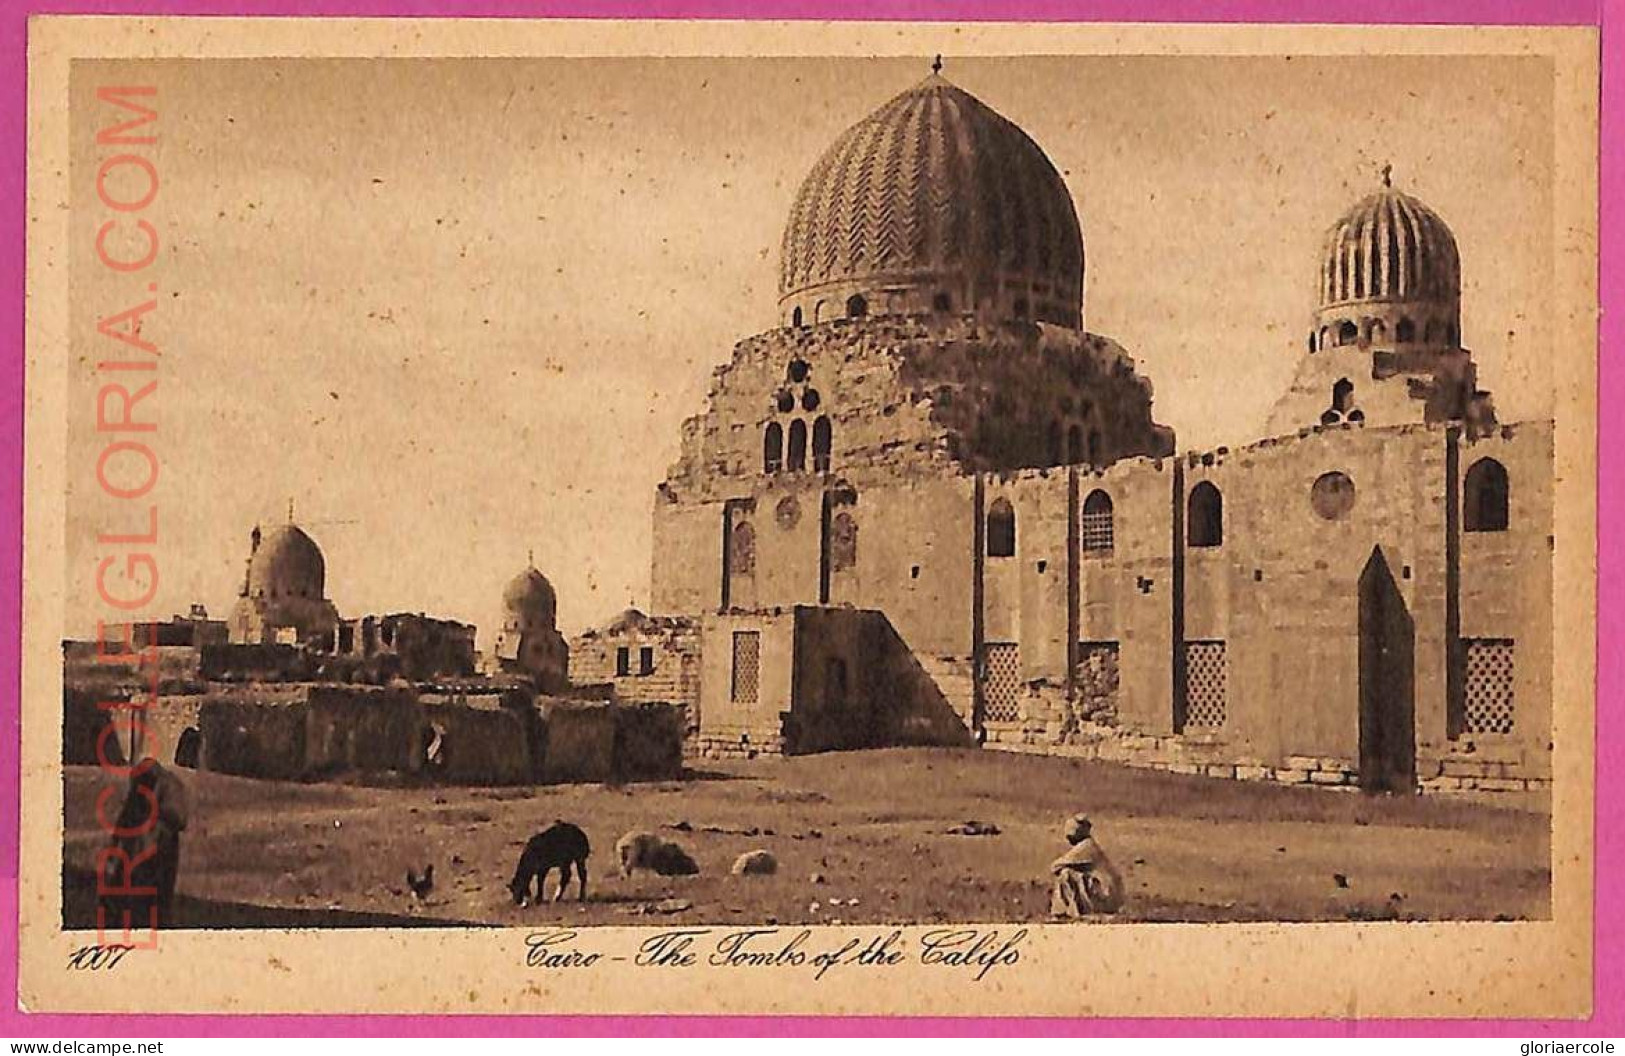 Ag2985 - EGYPT - VINTAGE POSTCARD - Cairo, The Tombo Of The Califo - Le Caire